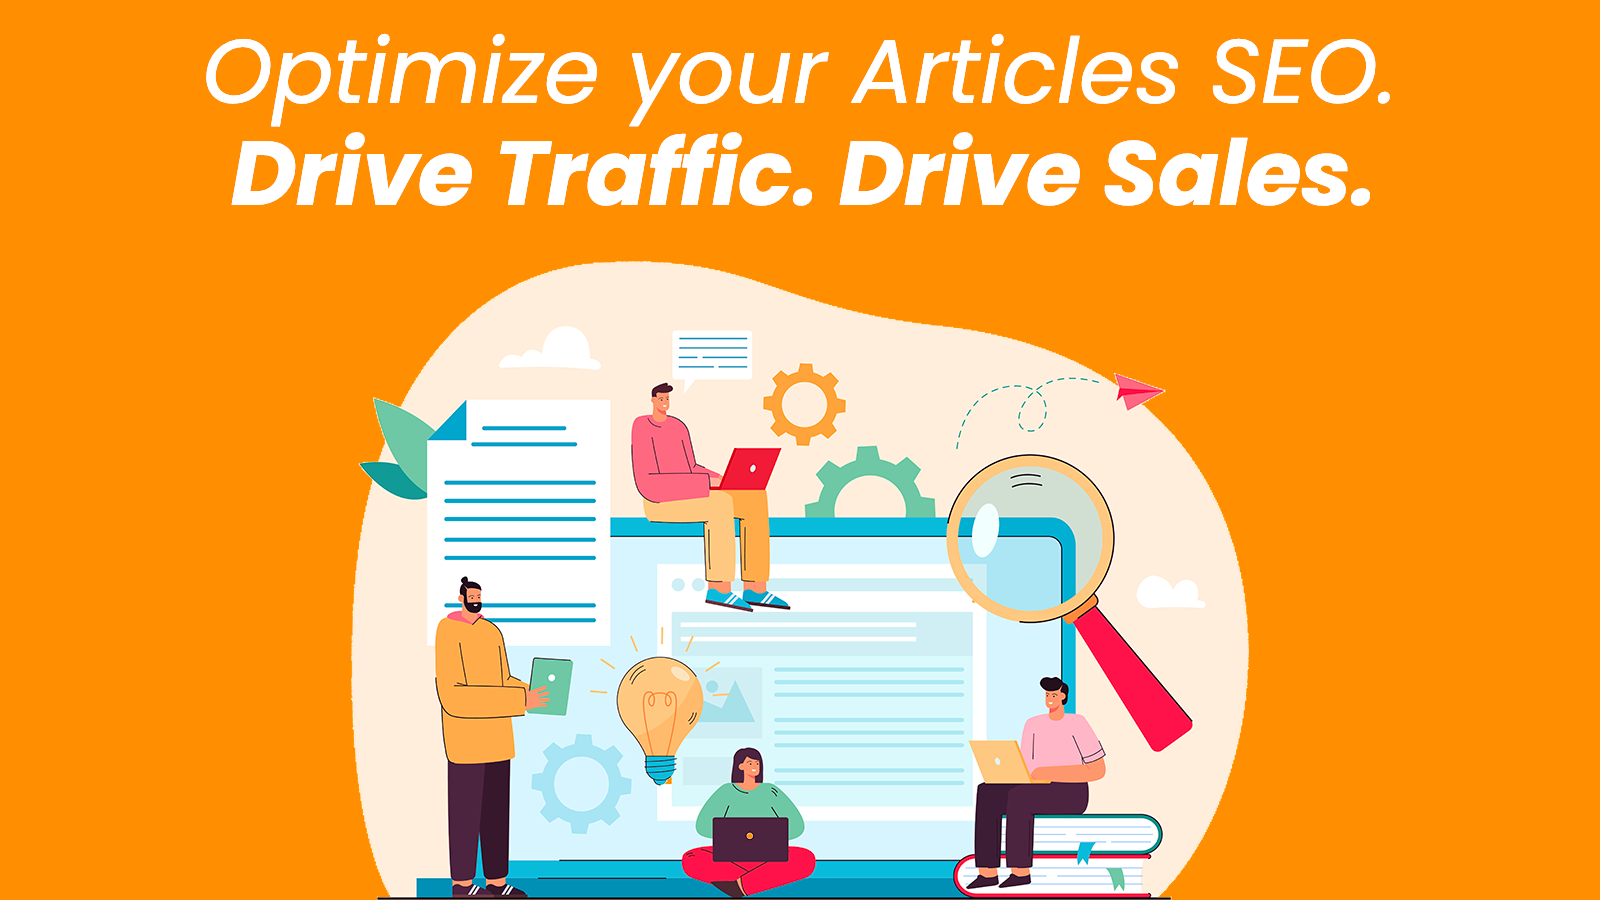 Optimize Blog & Articles SEO to drive traffic and sales.